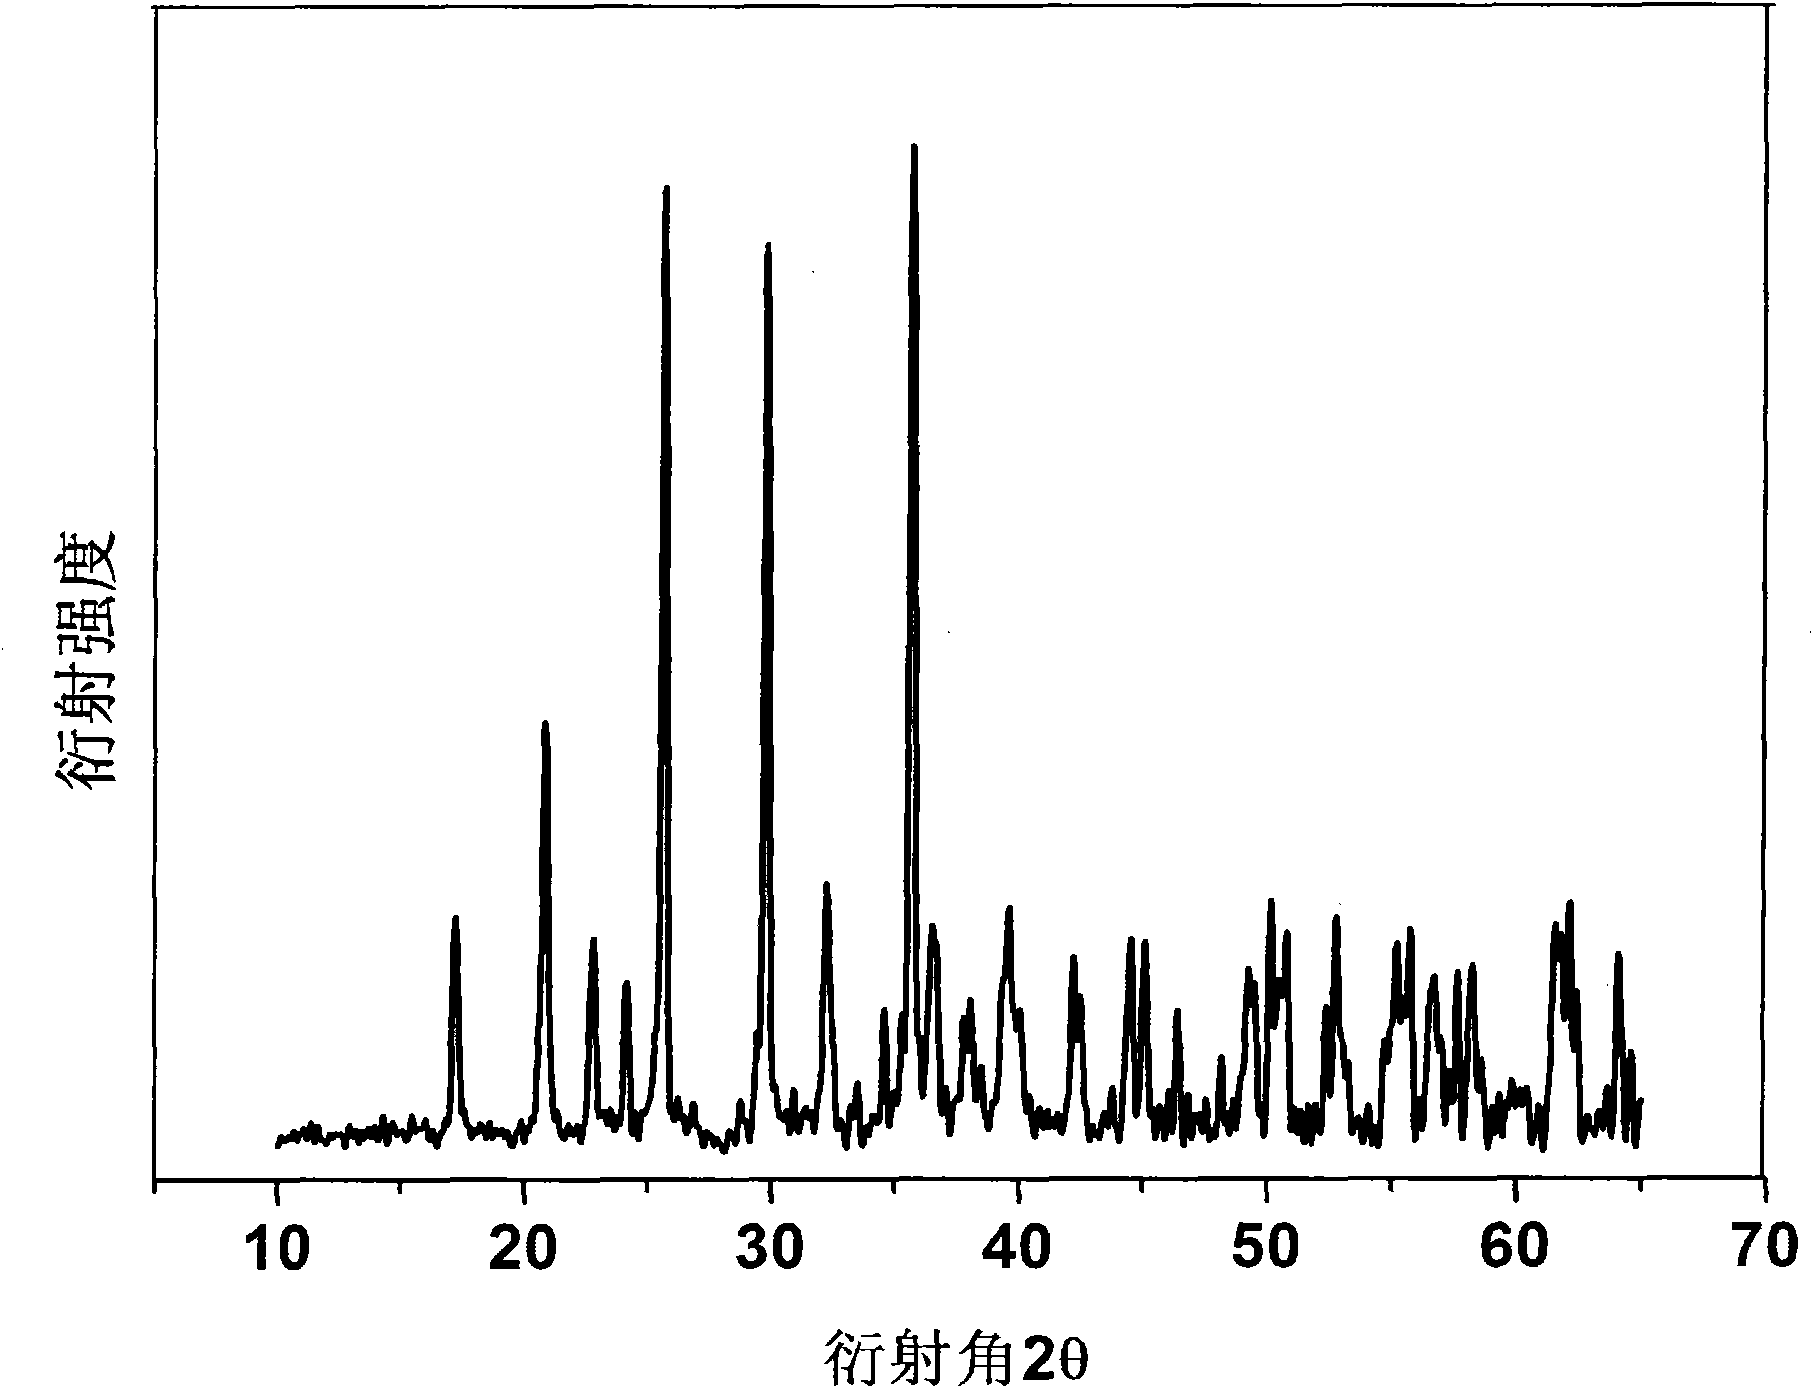 Fluorinion-doped lithium iron phosphate material and preparation methods thereof